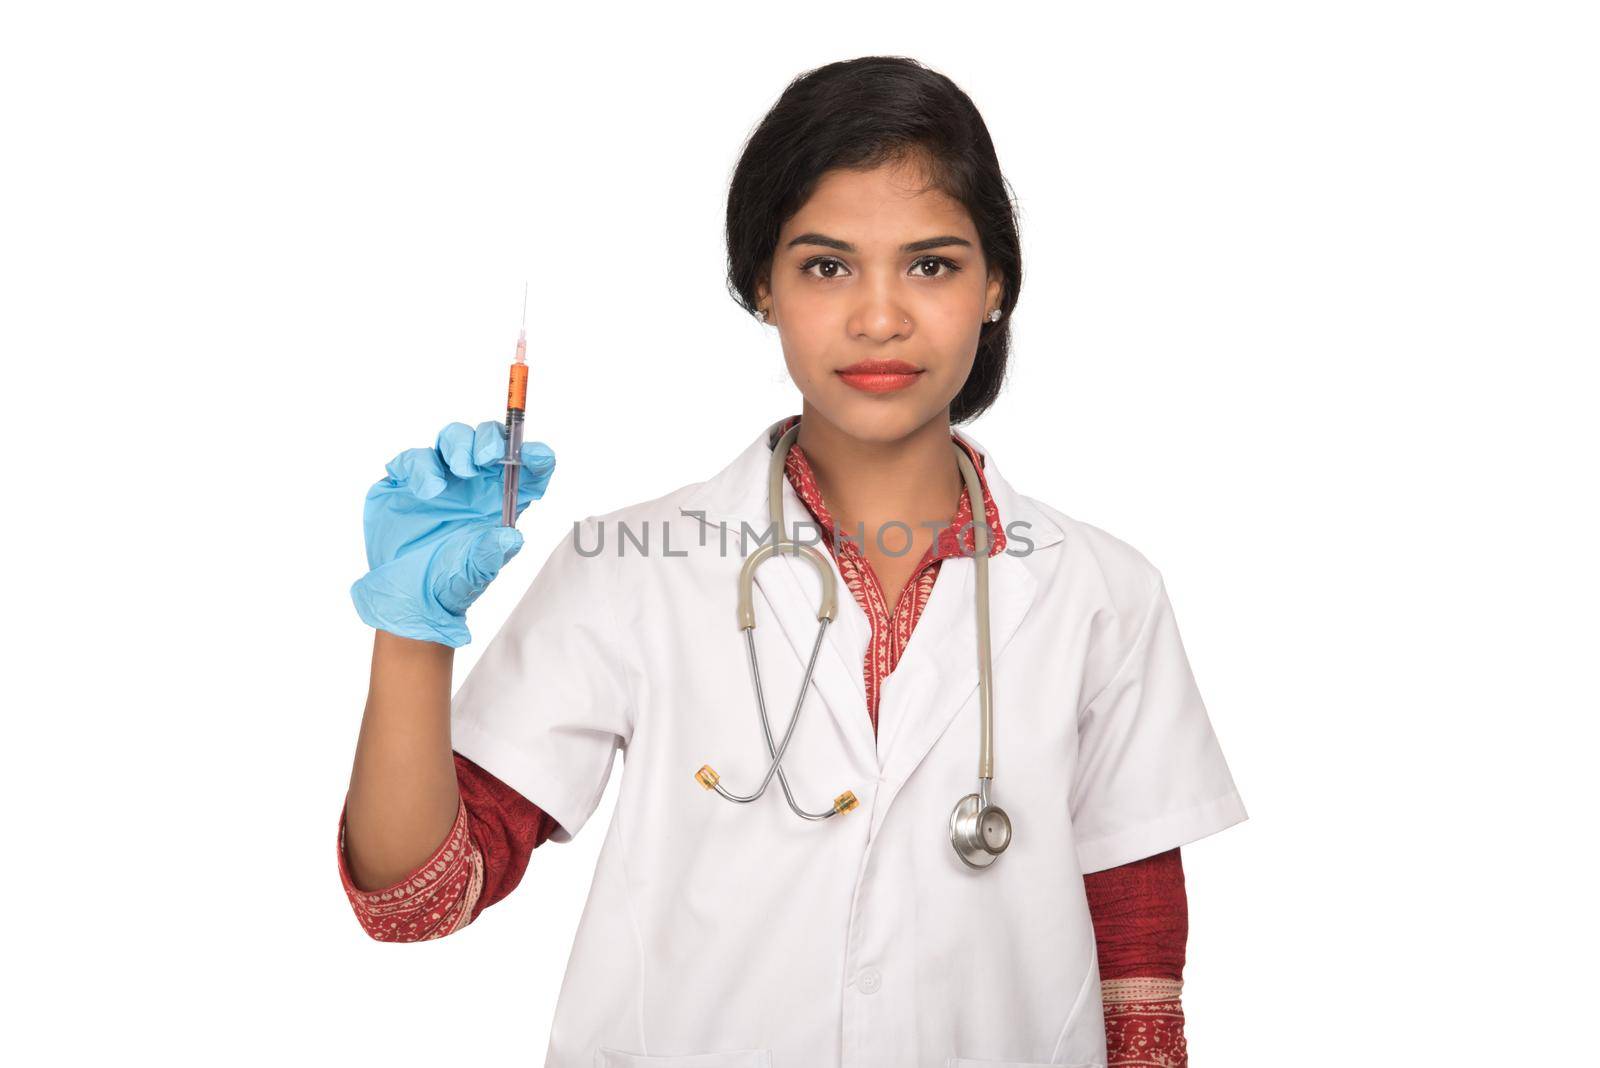 A female doctor with a stethoscope is holding an Injection or Syringe.